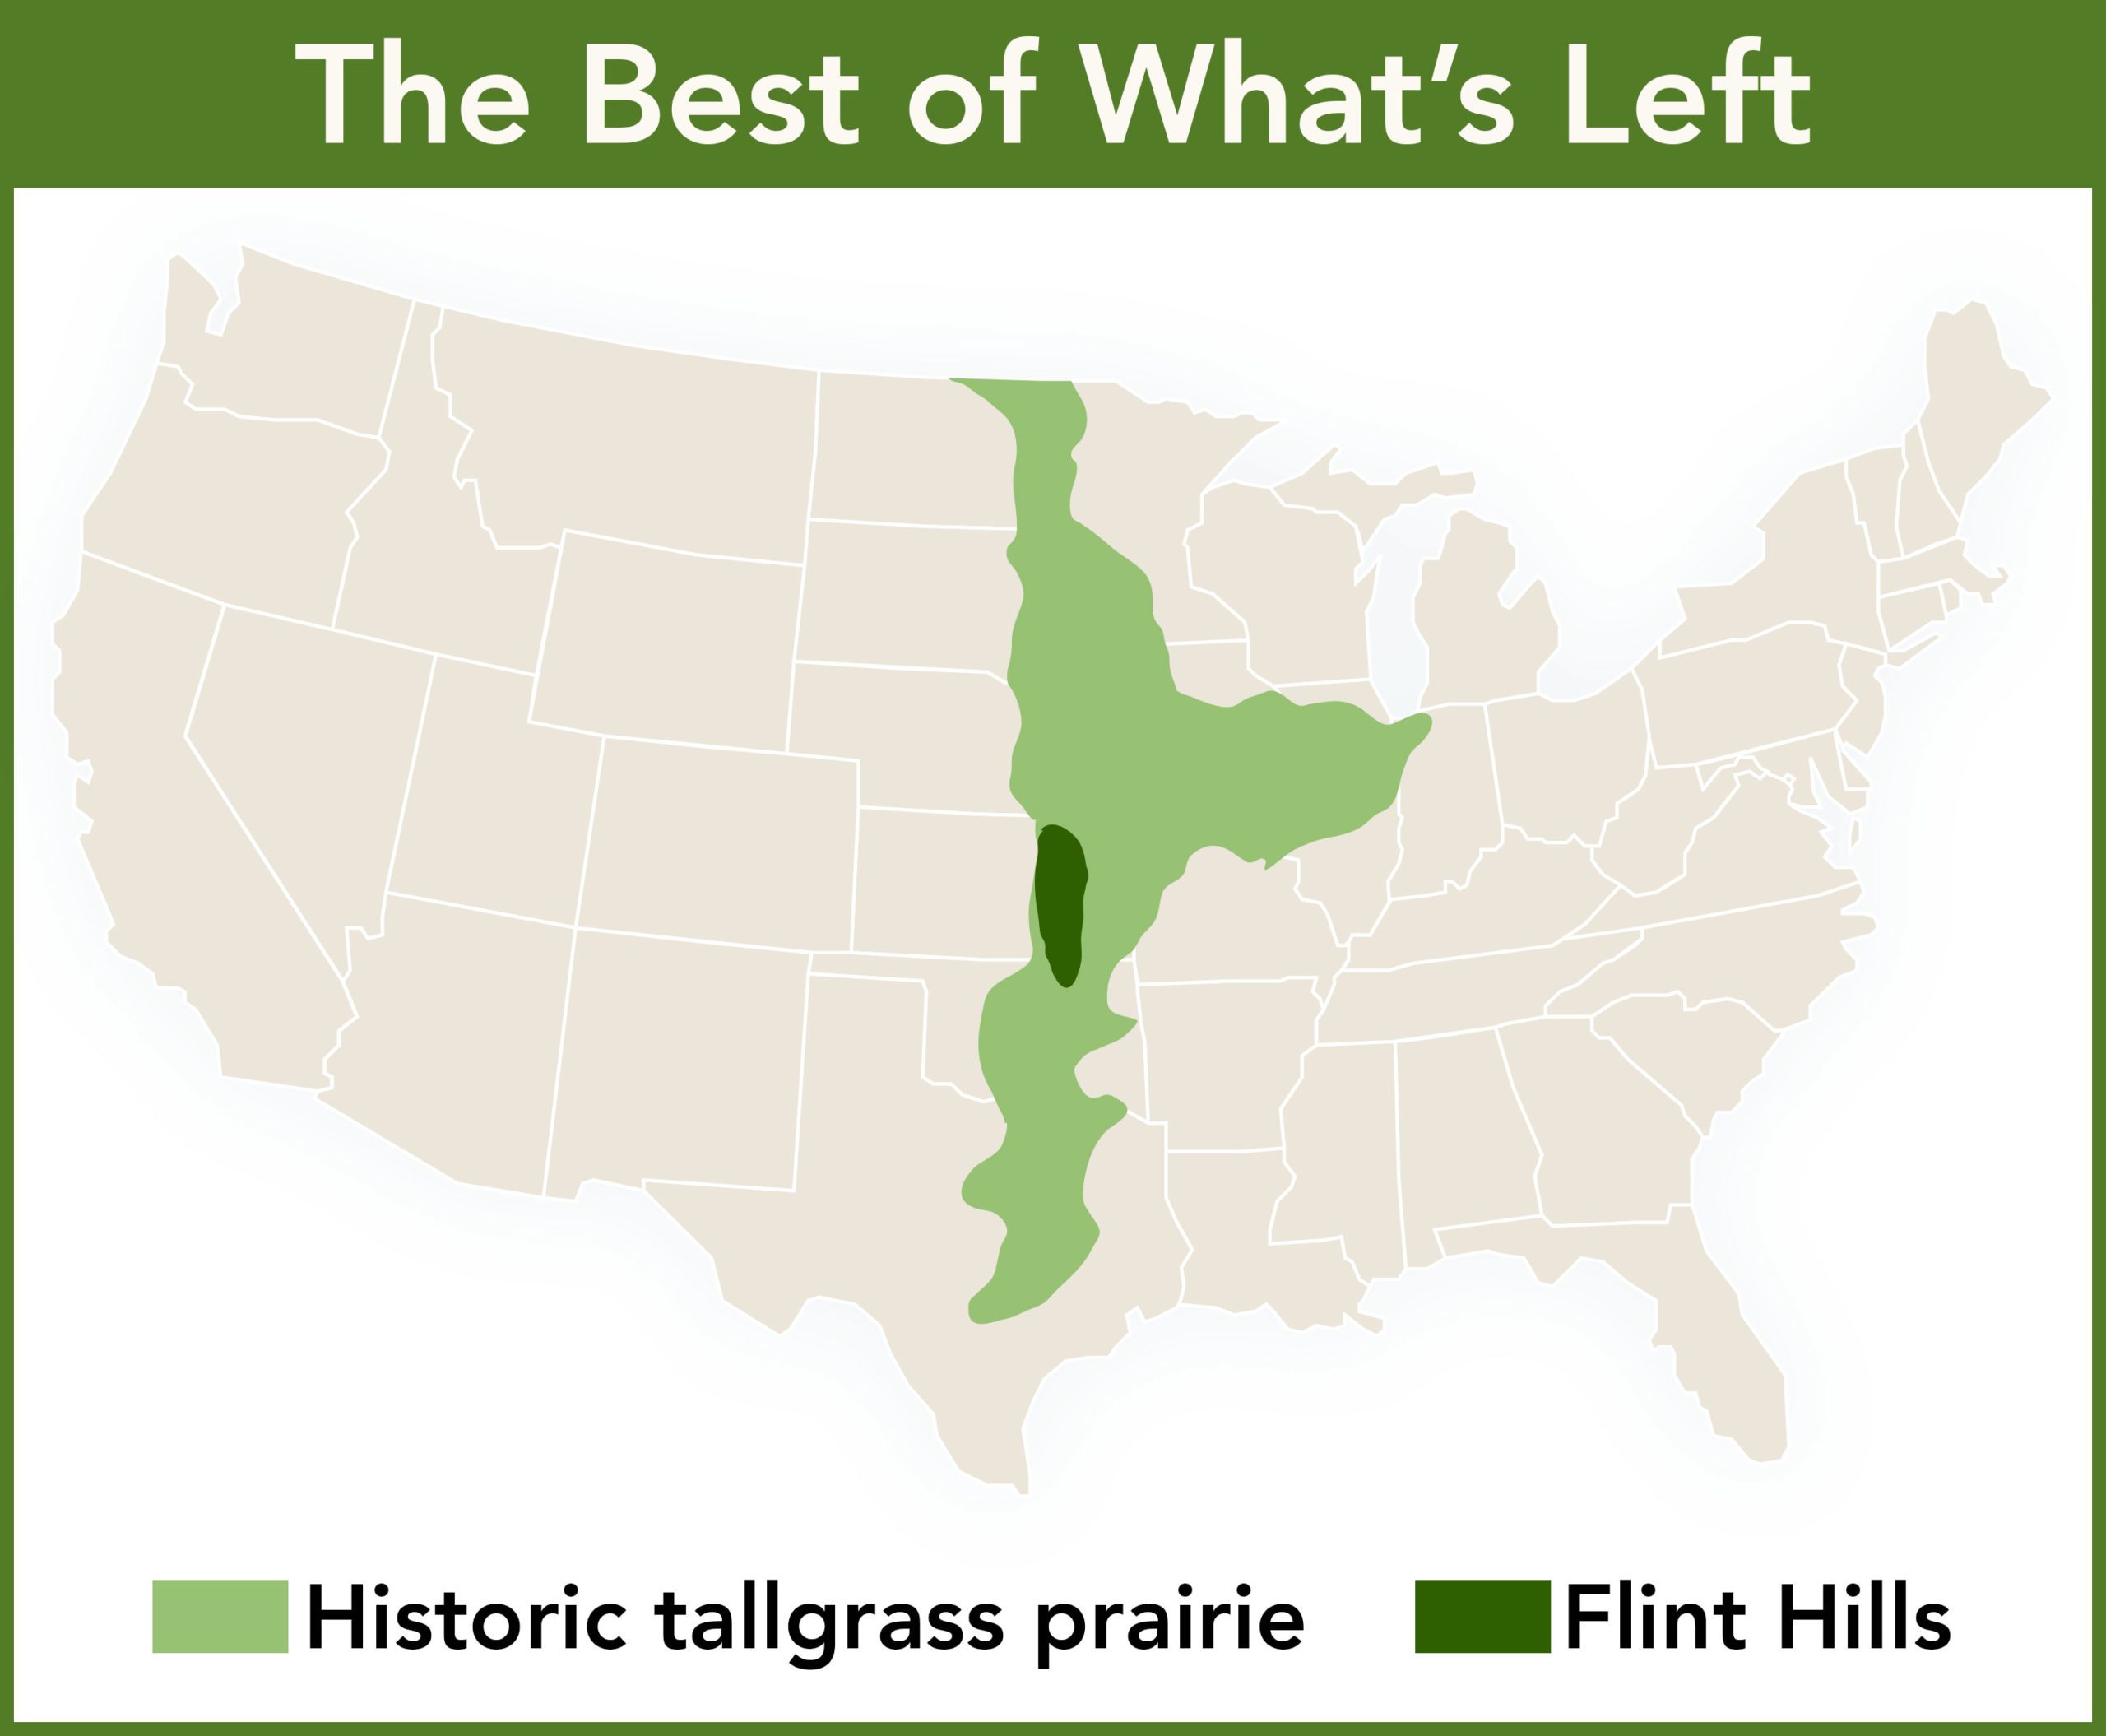 Less than 4% of the tallgrass prairie remains, with the best of what’s left in the Kansas Flint Hills.